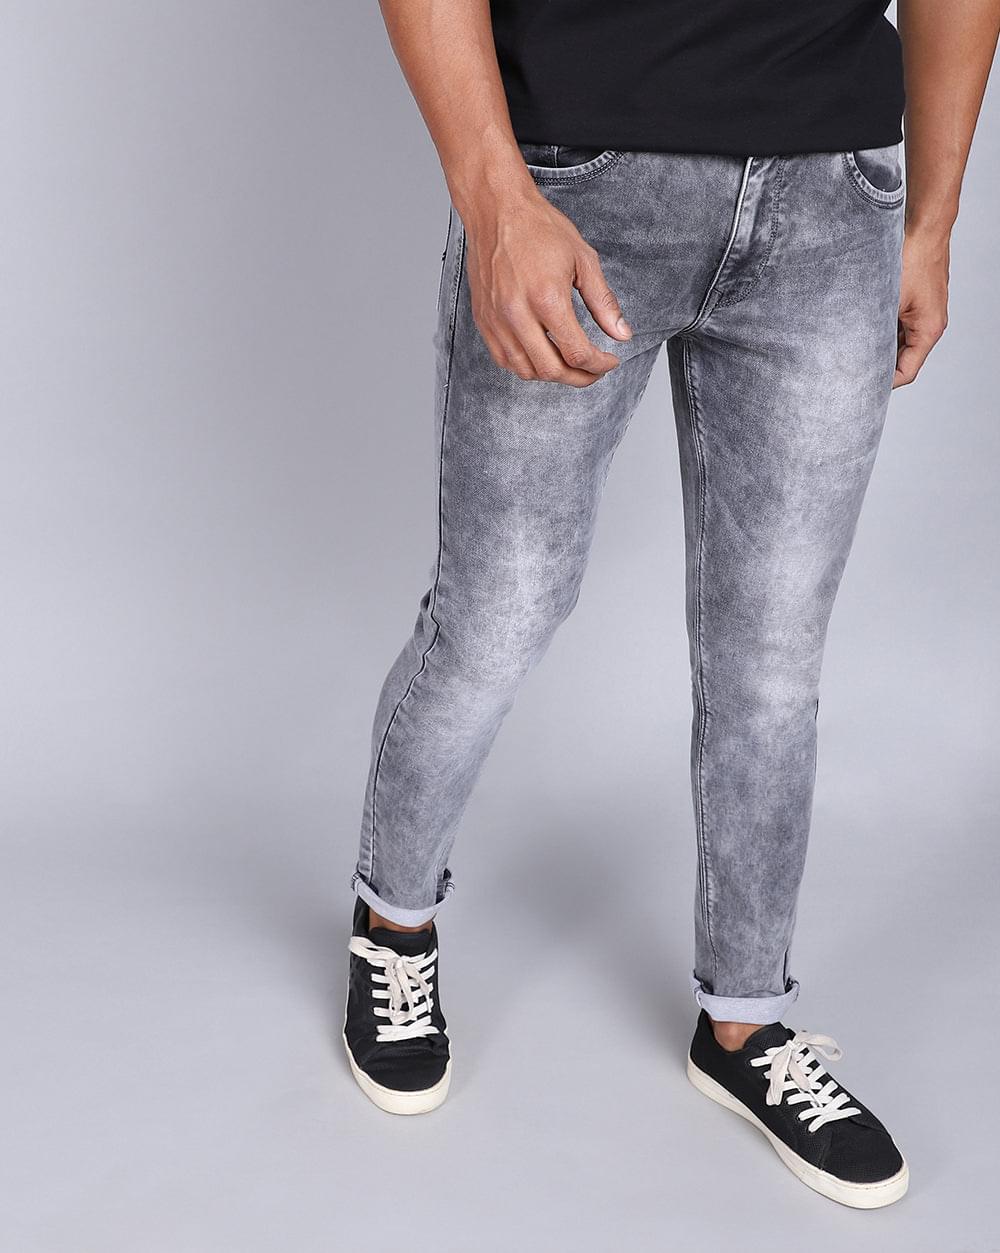 Buy Cool Light Grey Ankle Jeans For Men At Great Price – Rockstar Jeans